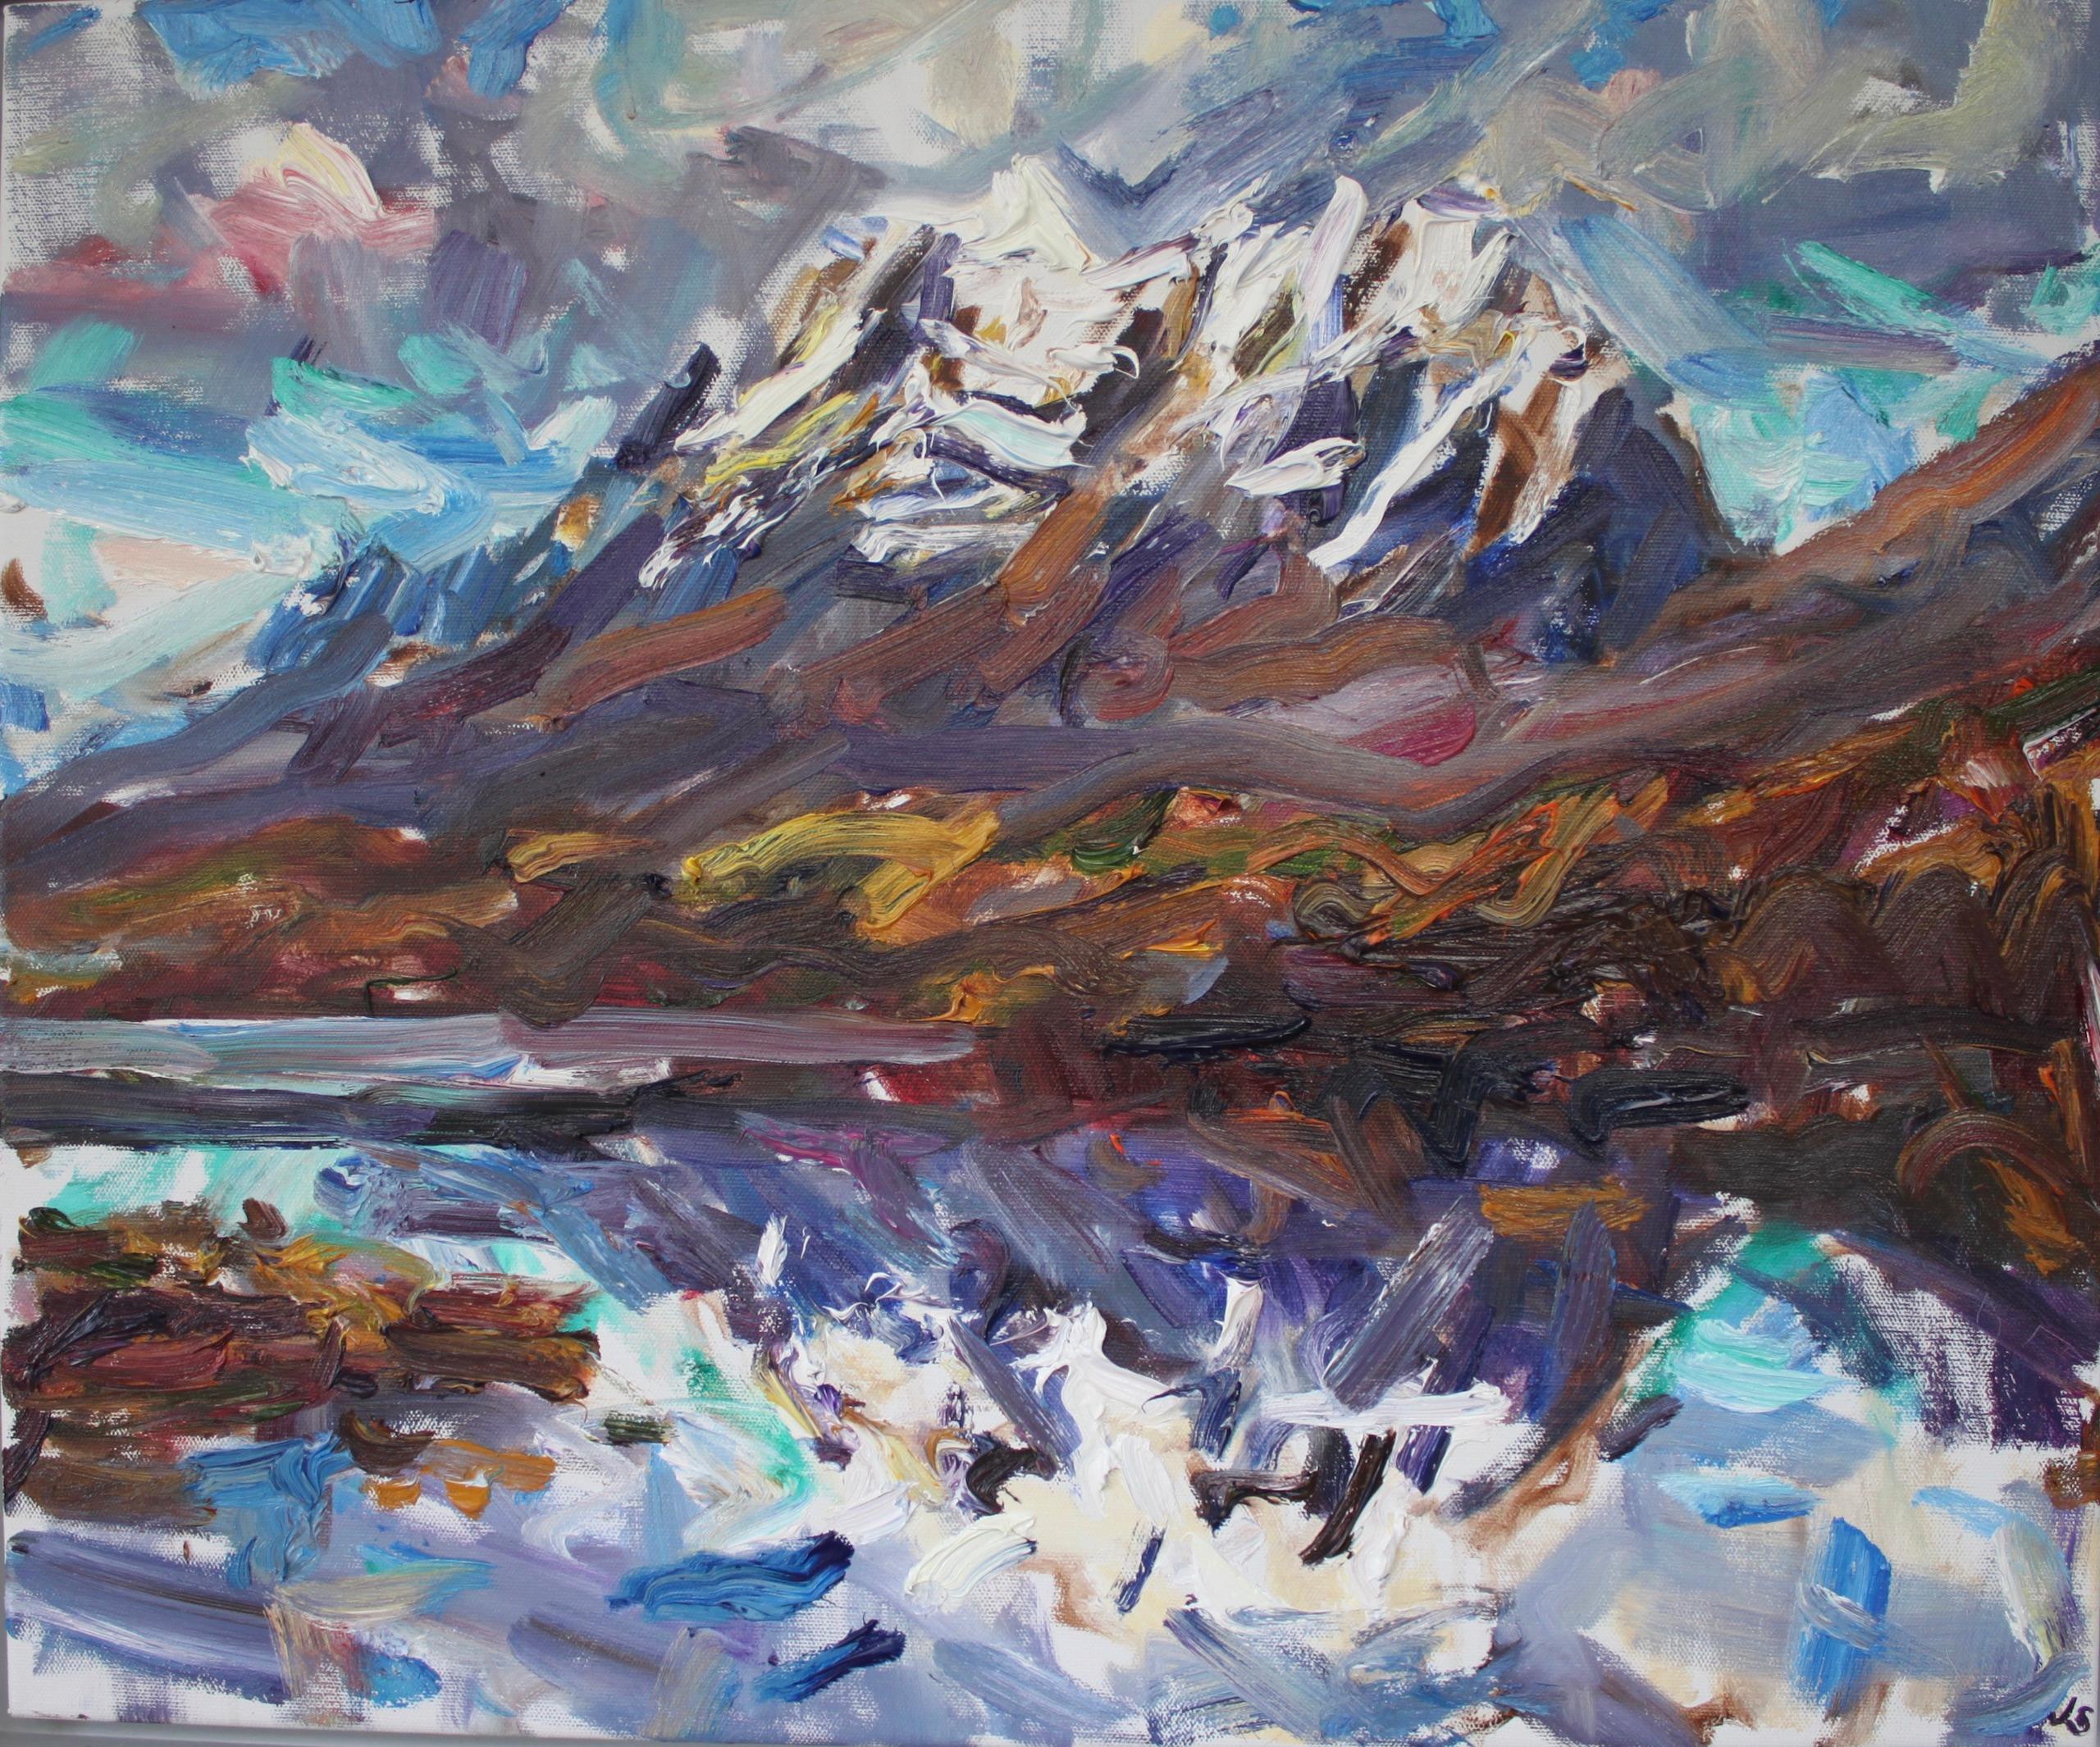 Liathach Reflection is a unique oil on canvas painting by contemporary artist Jonathan Shearer, dimensions are 41 × 51 × 3.5 cm (16.1 × 20.1 × 1.4 in).
The artwork is signed, sold unframed and comes with a certificate of authenticity.

Jonathan